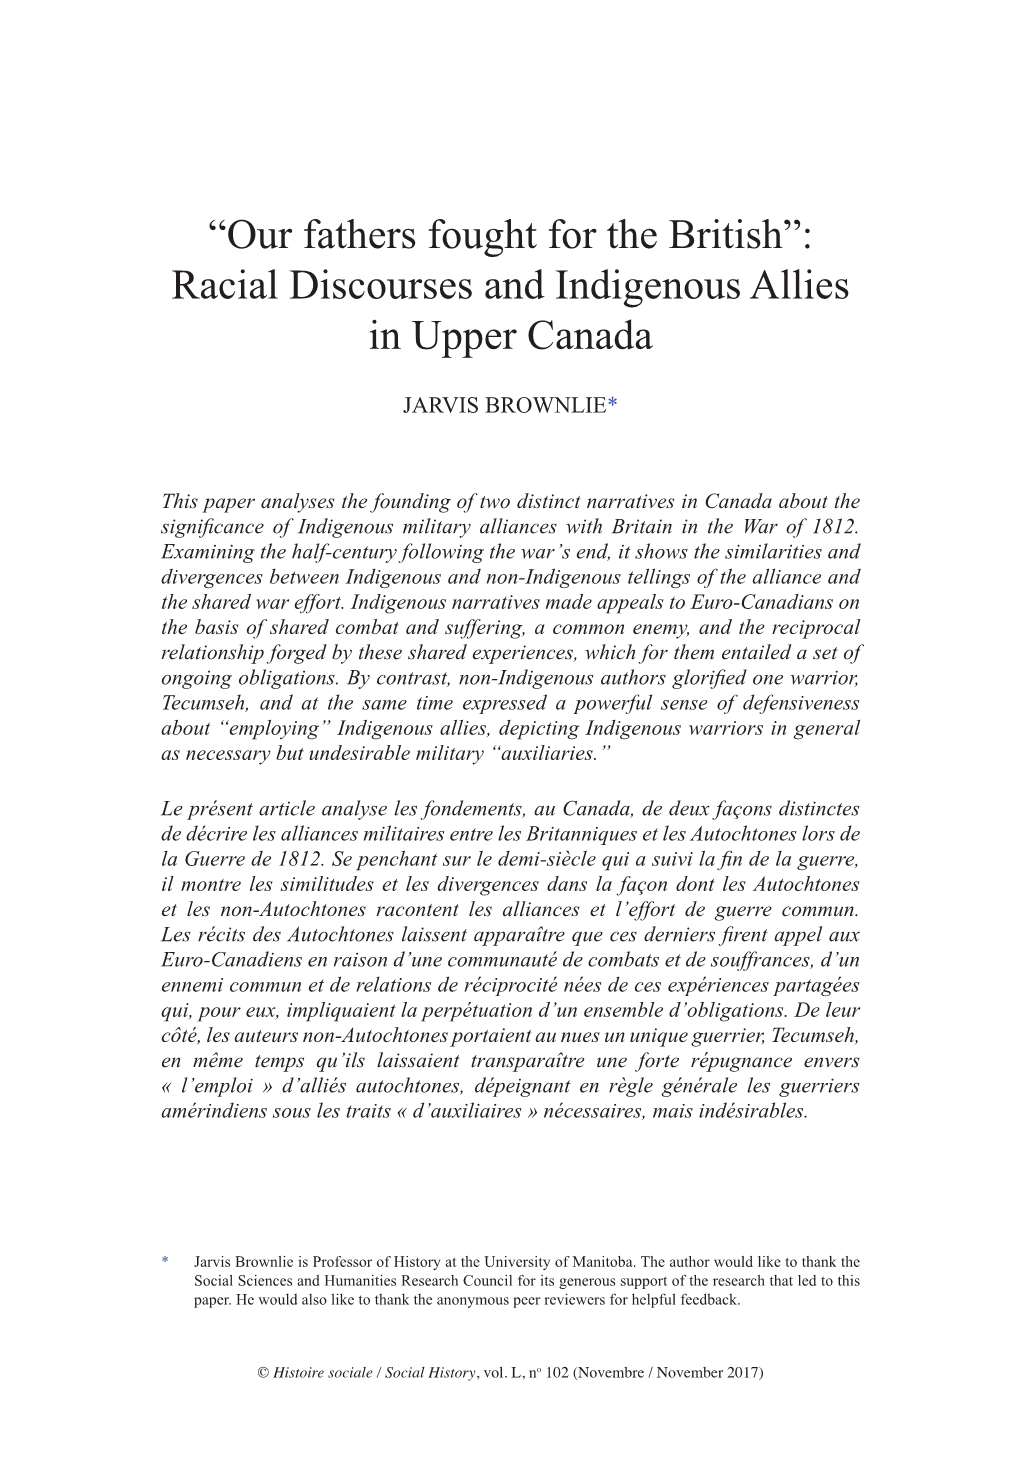 Racial Discourses and Indigenous Allies in Upper Canada